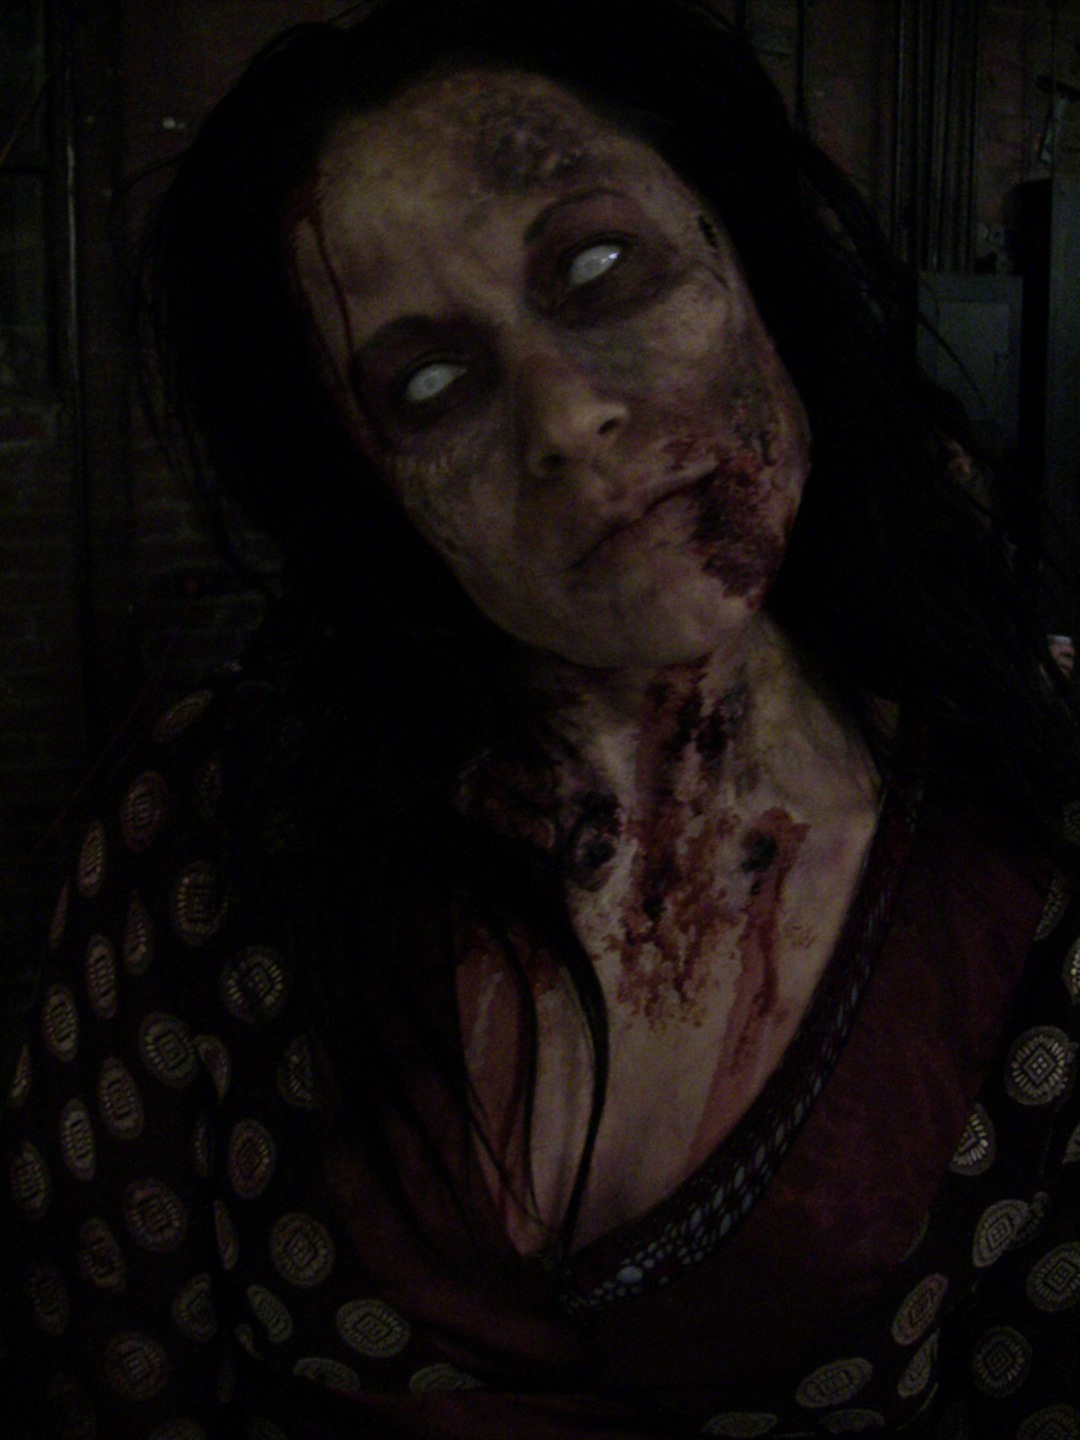 Zombie makeup from season 2 of 